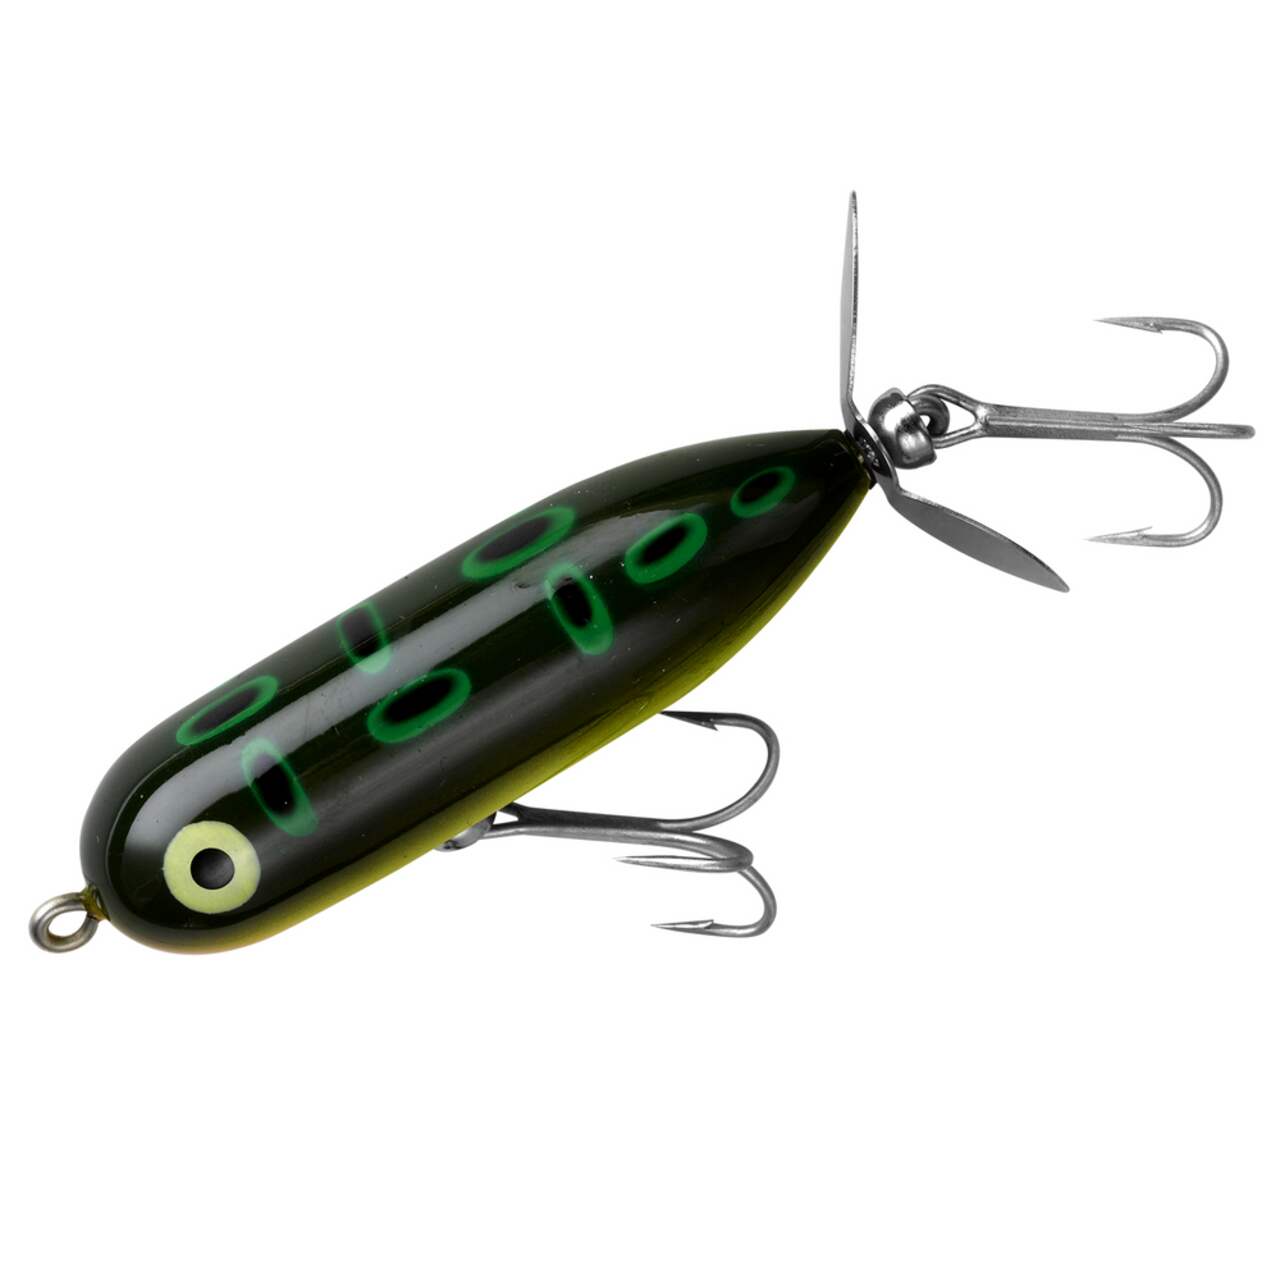 https://media-www.canadiantire.ca/product/playing/fishing/fishing-lures/0777716/heddon-baby-torpedo-bull-frog-3-8oz-4ac8617e-d33b-4677-821a-813c16417057.png?imdensity=1&imwidth=640&impolicy=mZoom